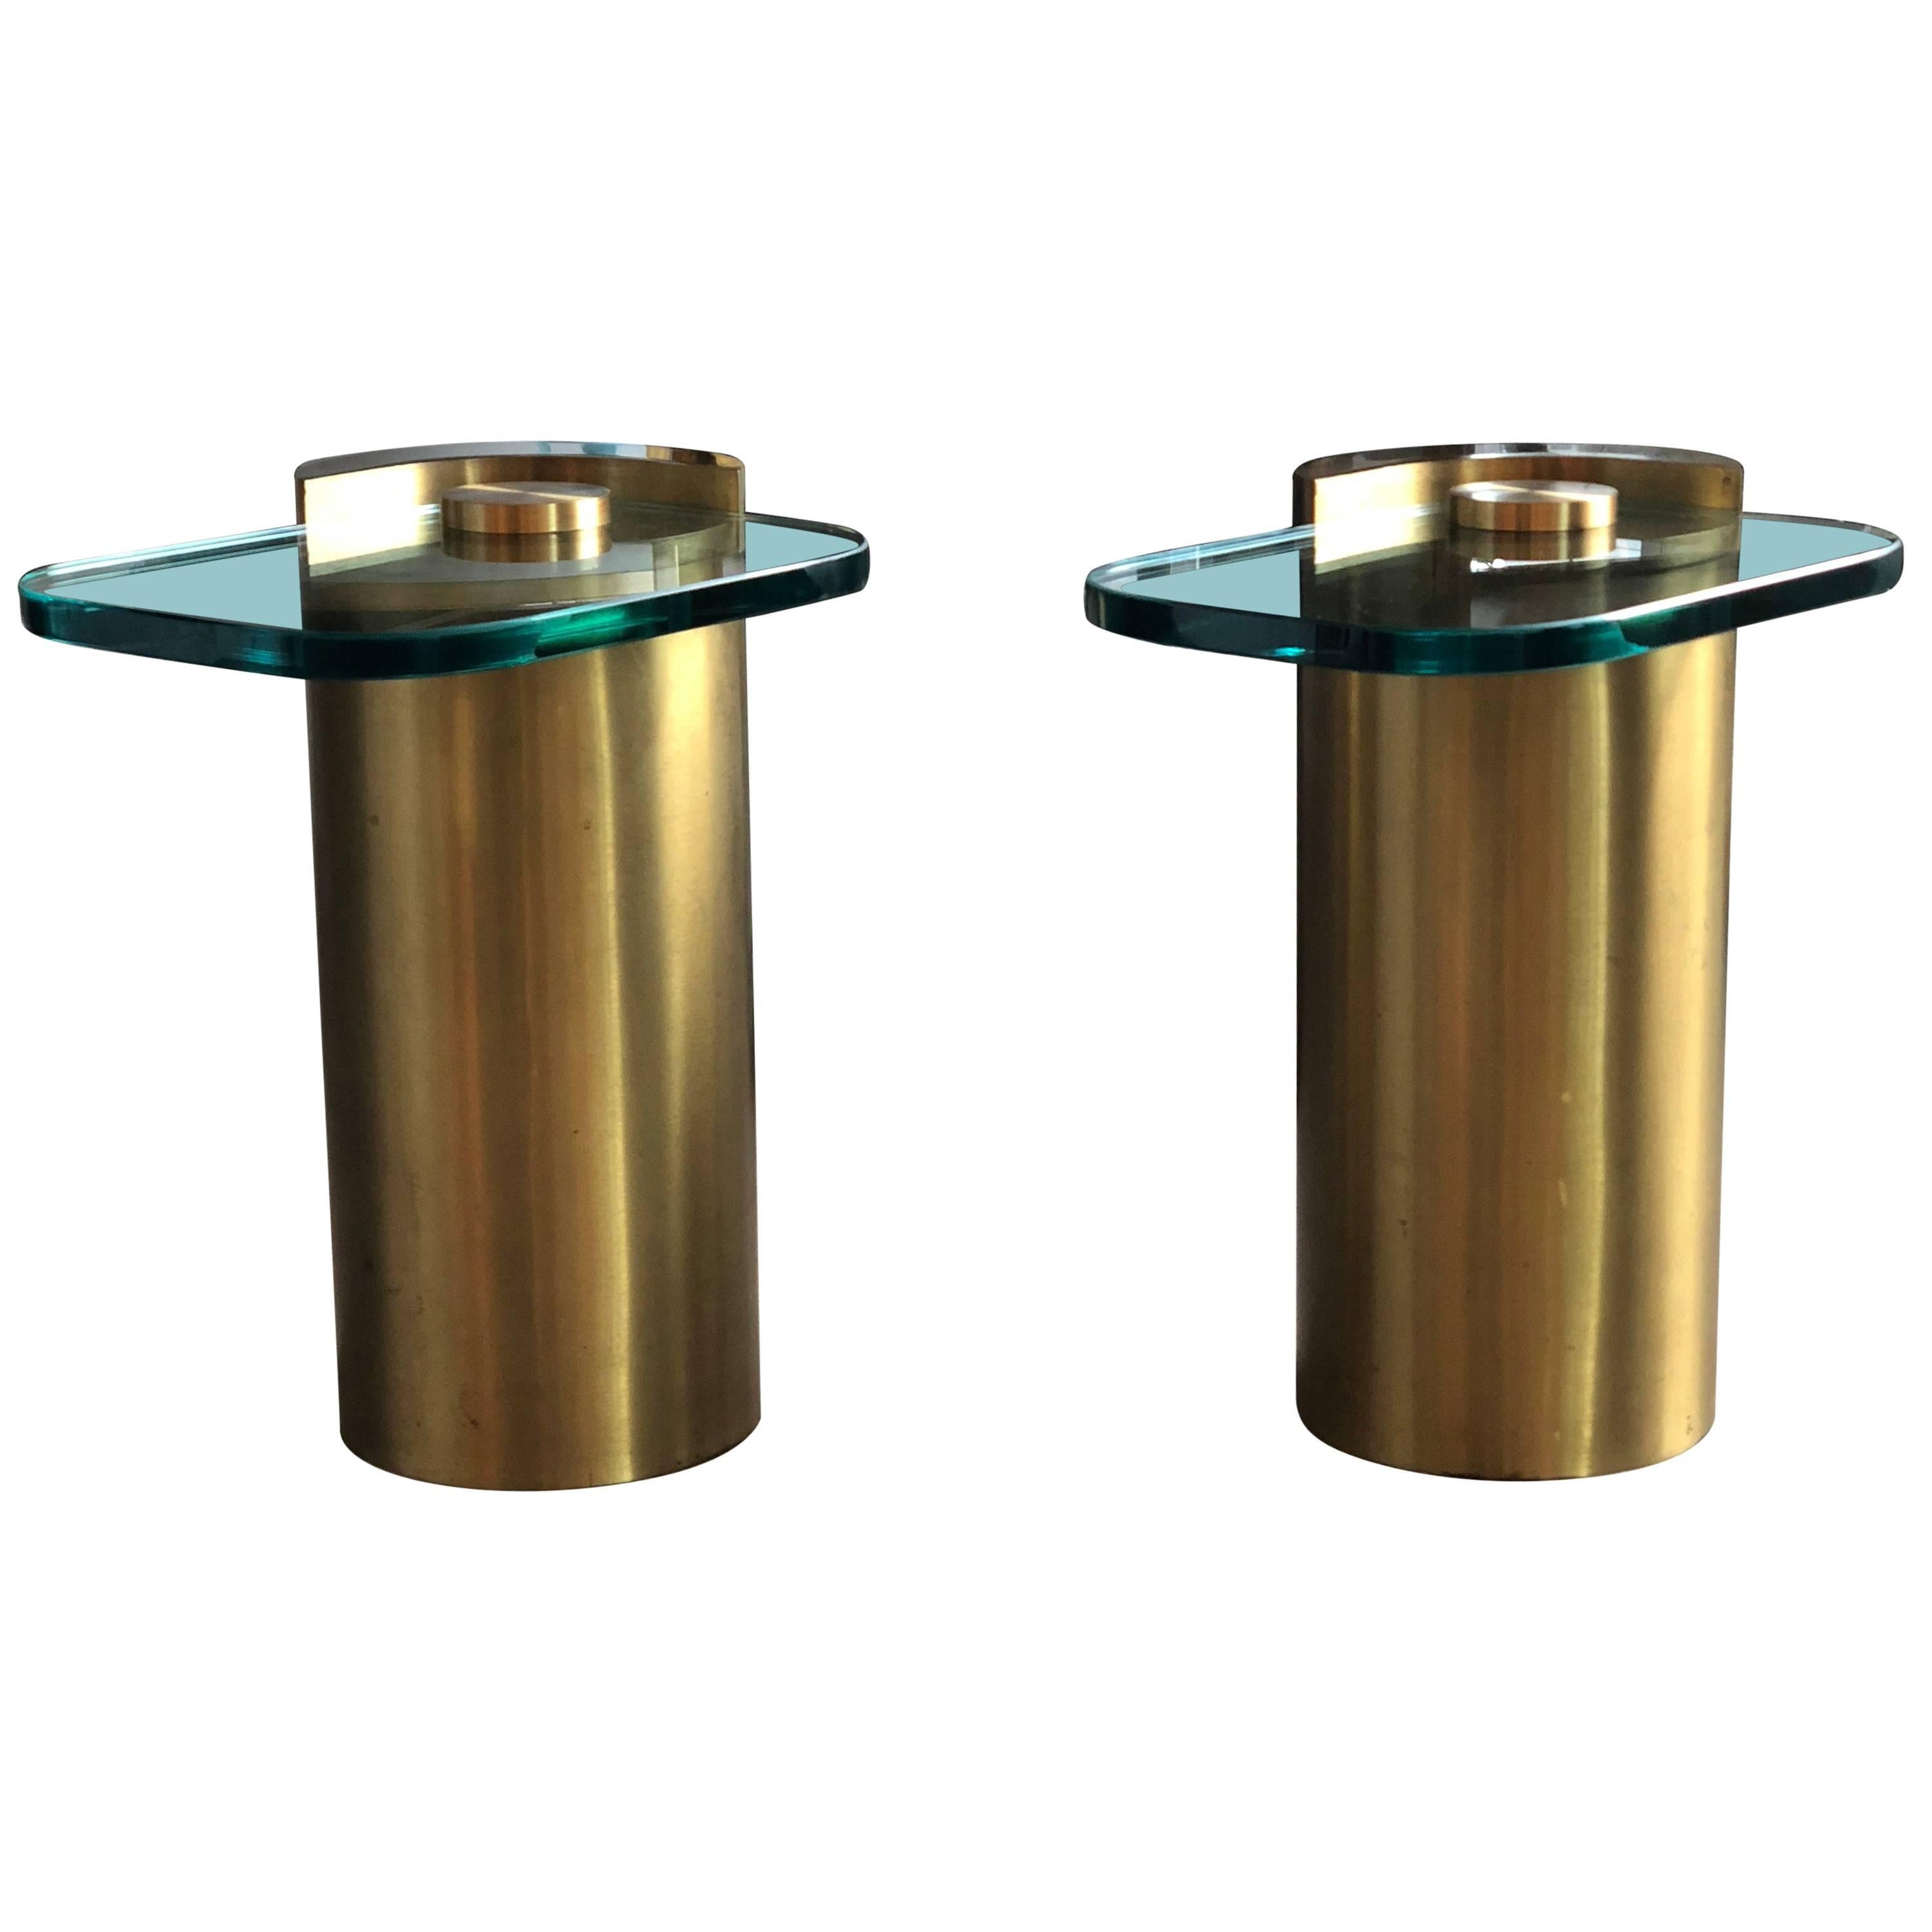 Offered is a pair of Mid-Century Modern Karl Springer style brass cylinder 